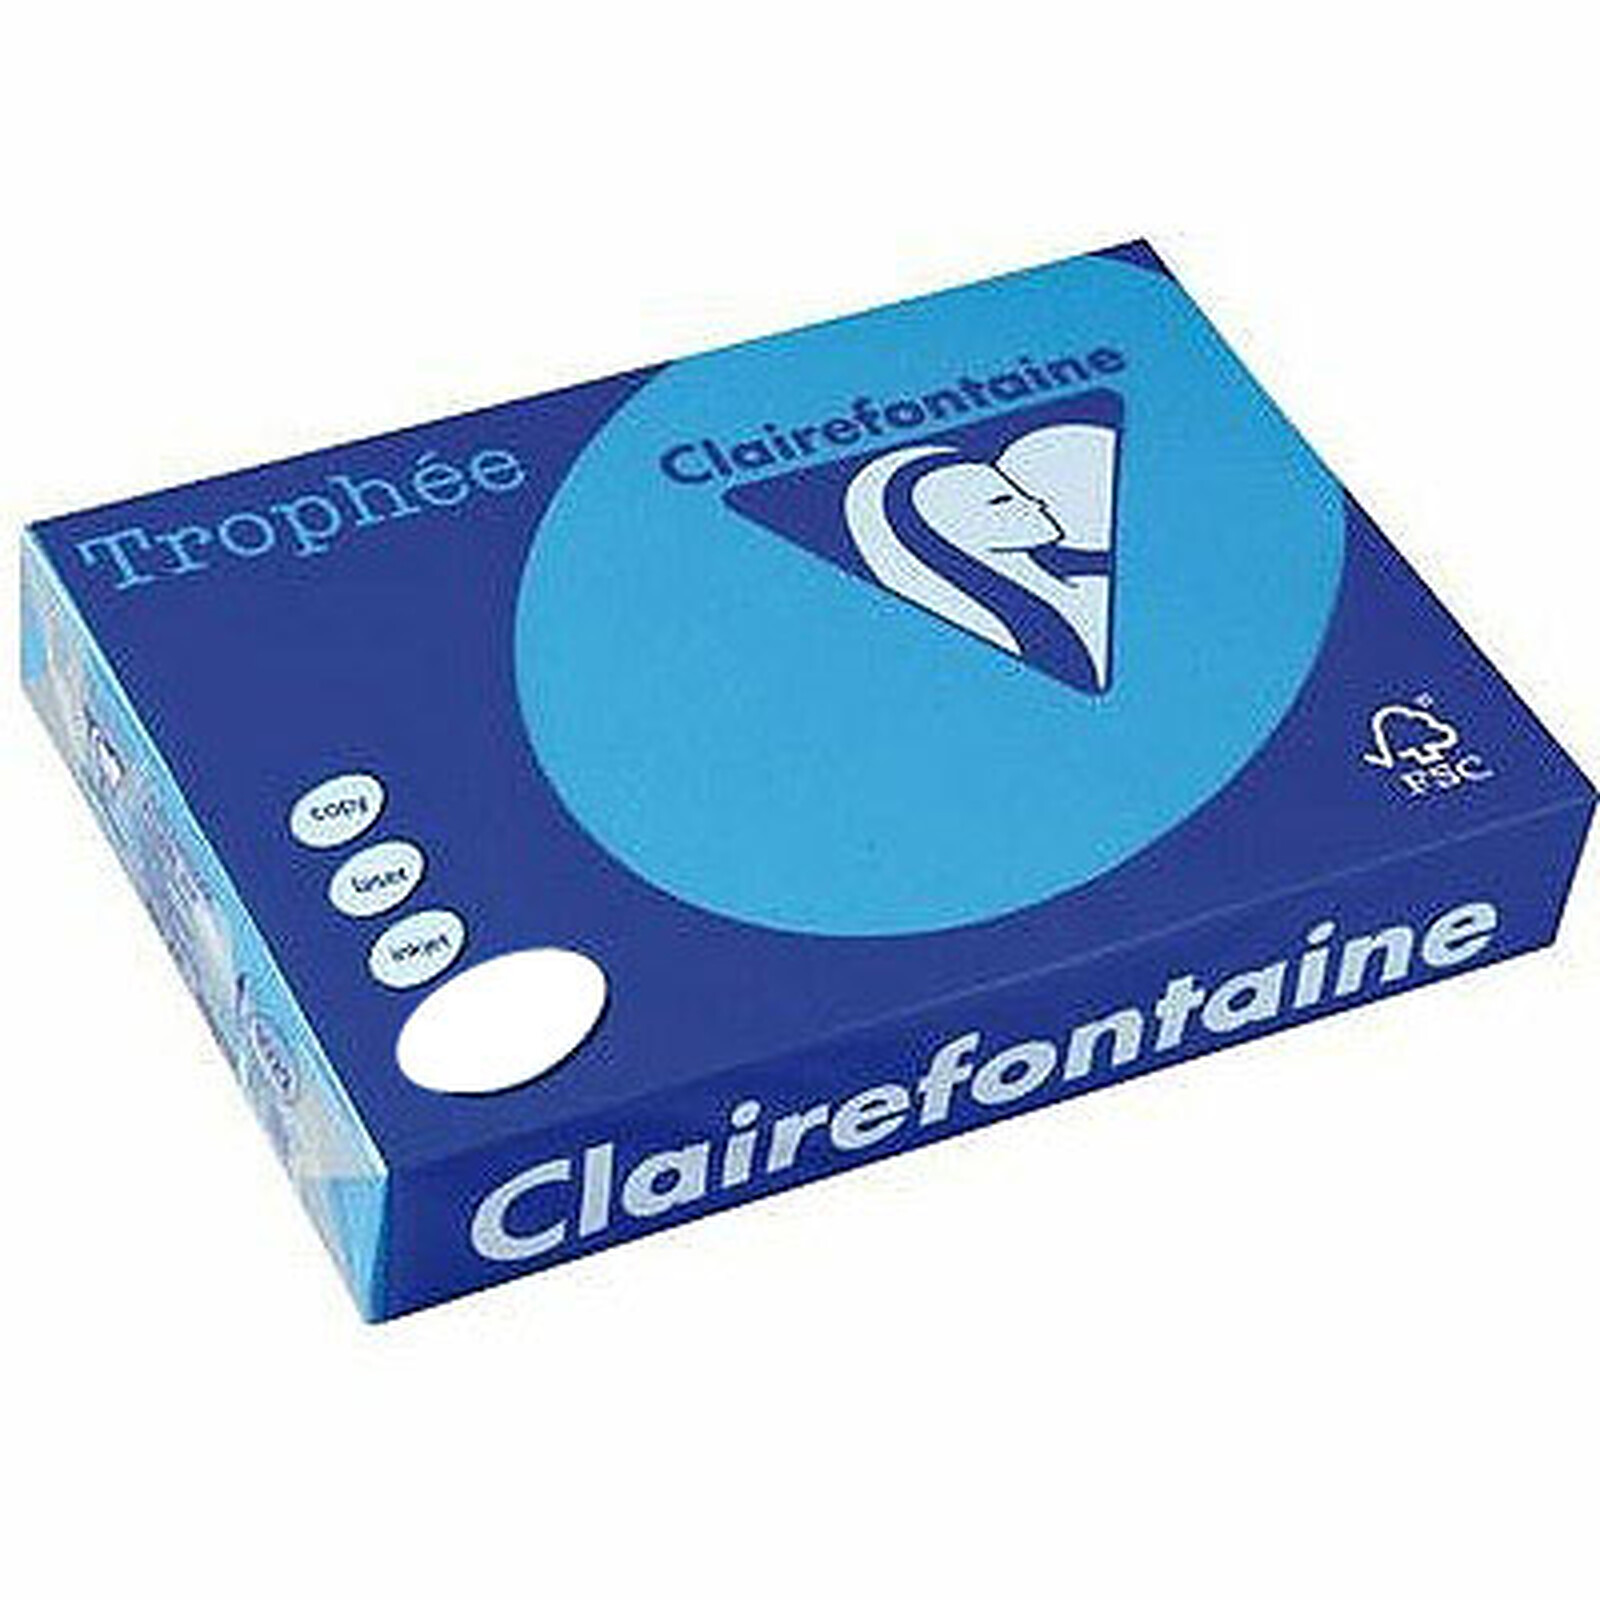 Clairefontaine Clairalfa 90g A4 ramette 500 feuilles Blanc X5